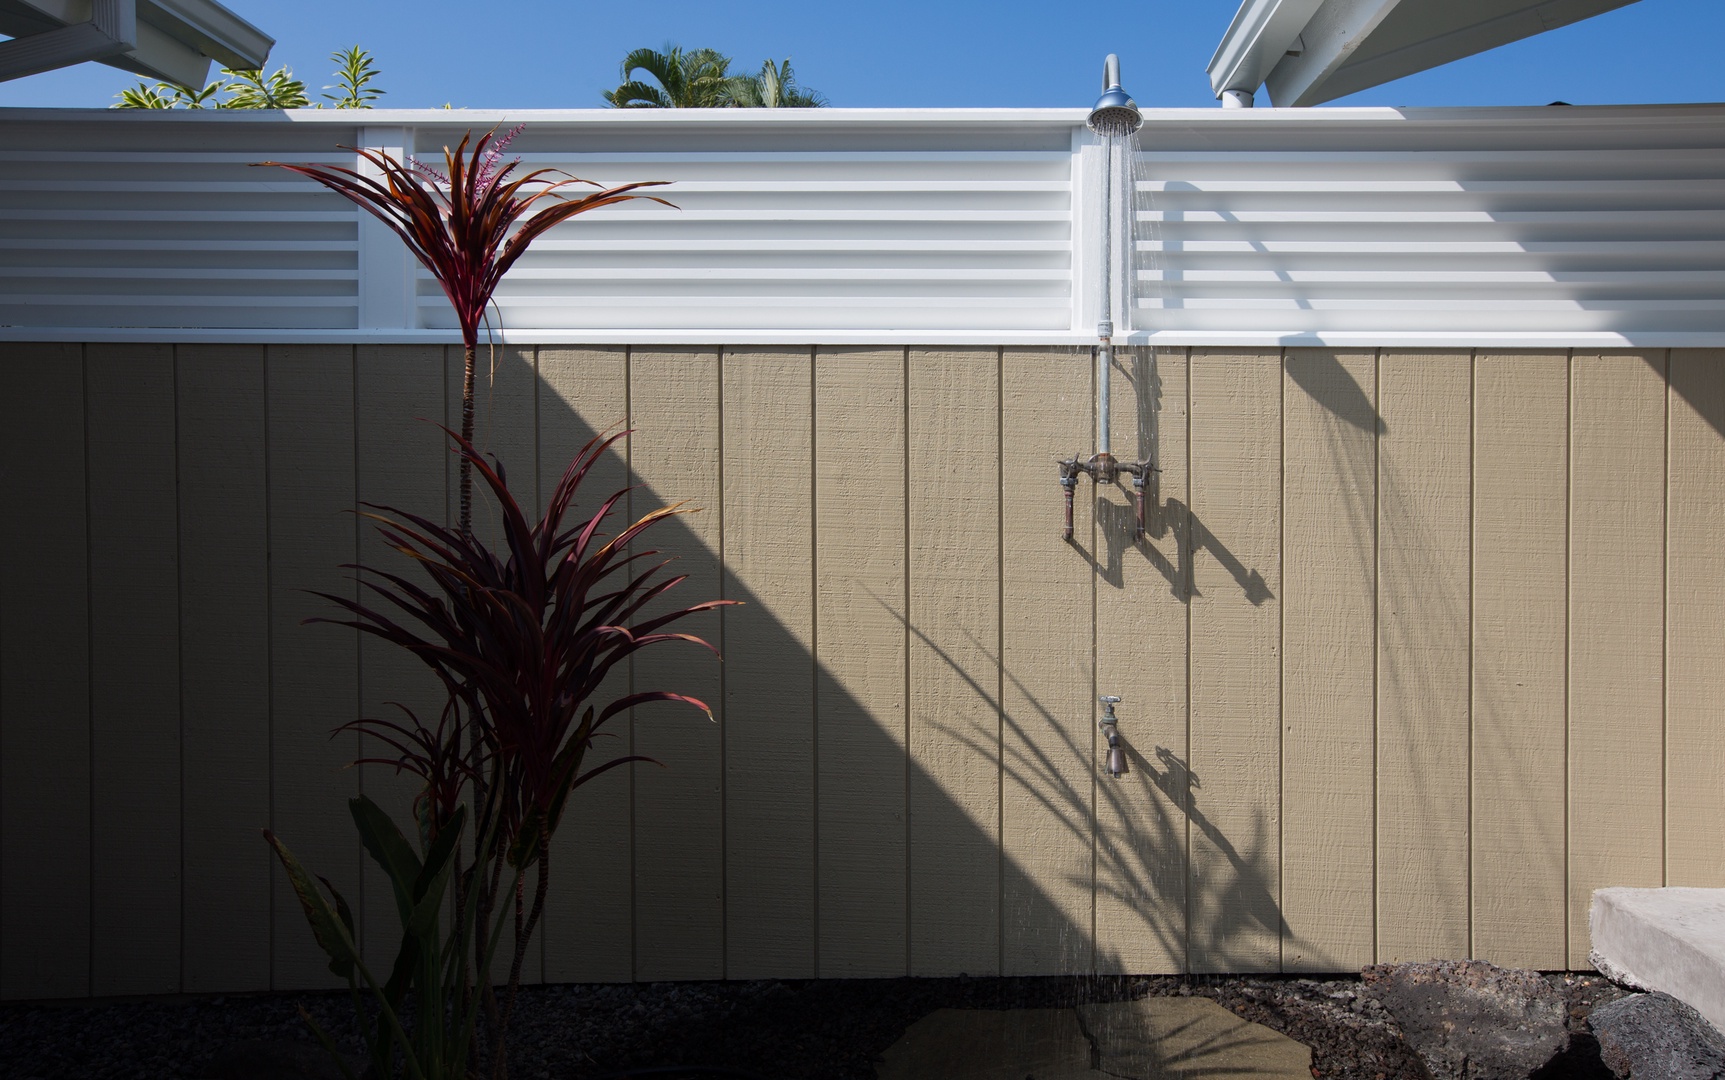 Kailua Kona Vacation Rentals, He'eia Bay Beach Bungalow (Big Island) - Rinse off in the refreshing open-air shower!